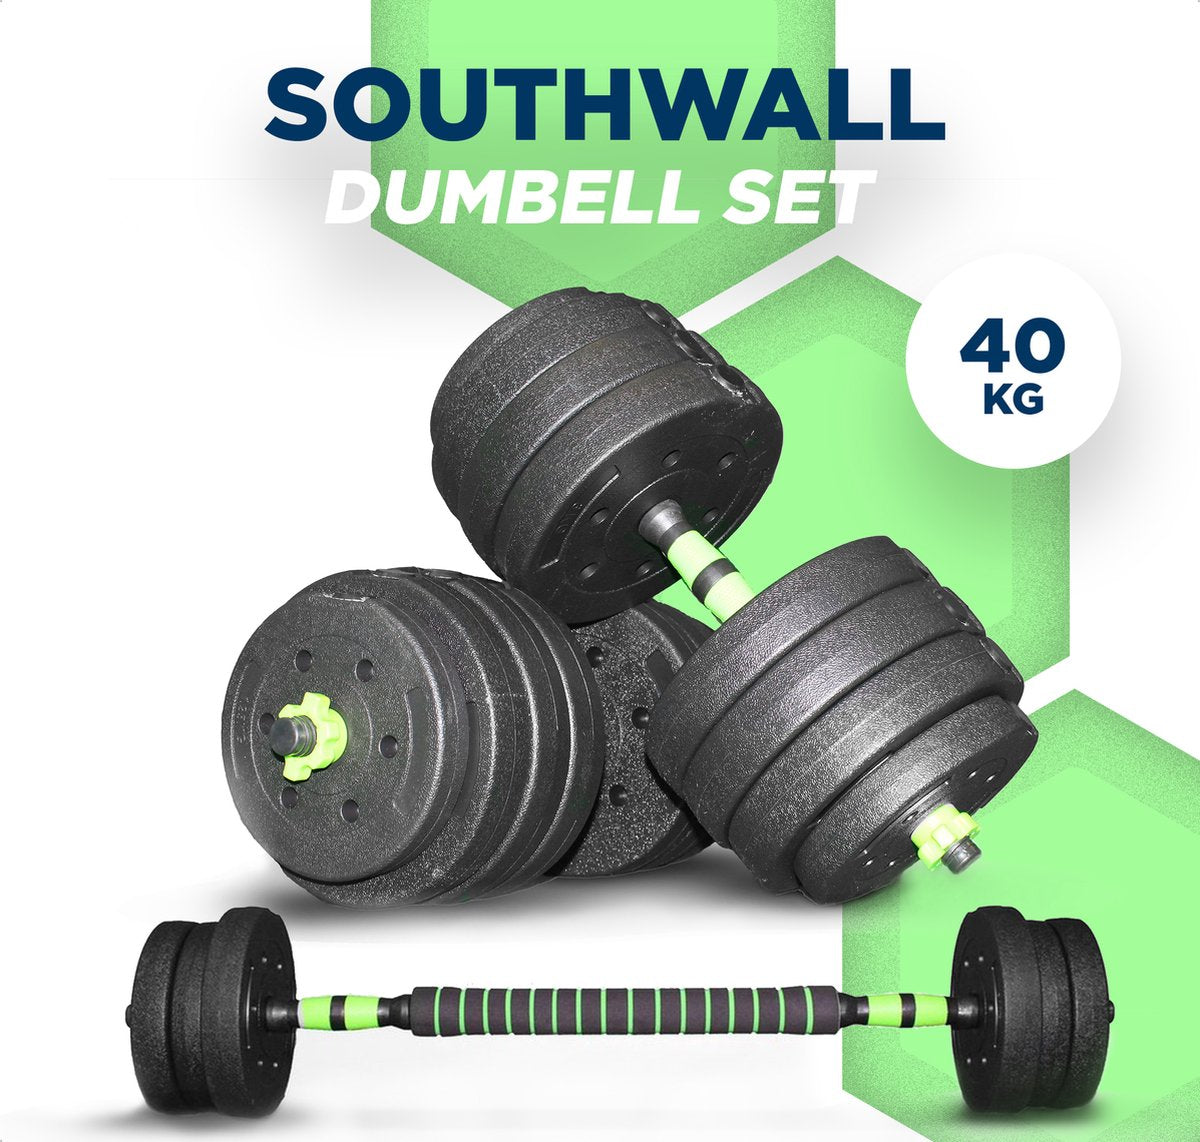 SOUTHWALL Dumbbells set adjustable with barbell up to 40kg Green